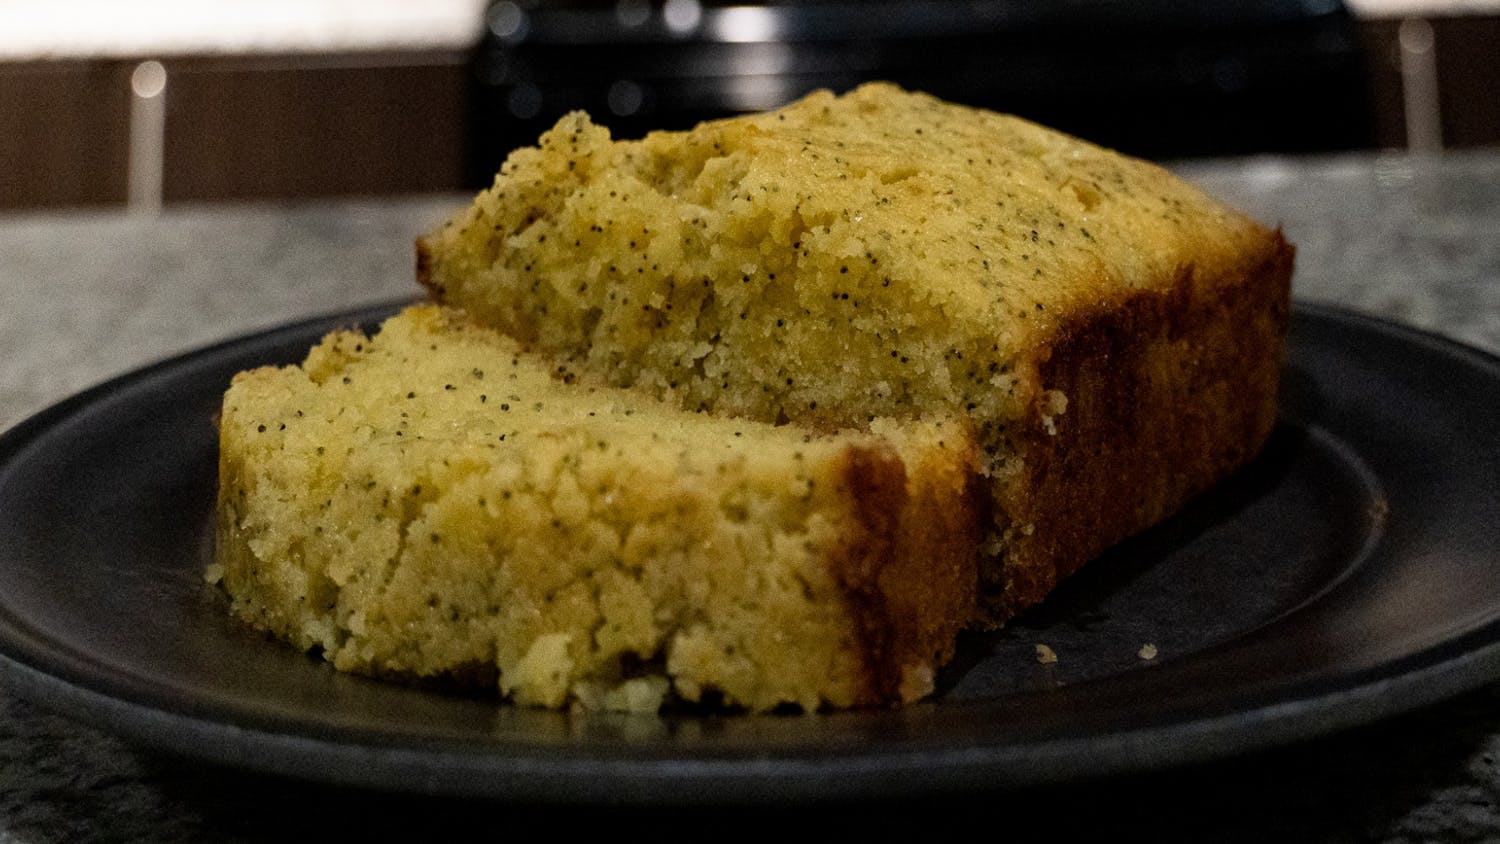 The lemon poppy seed loaf on Jan. 25, 2022. The easy-to-bake lemon bread serves a popular desert that goes well with coffee or tea with its candied lemon flavor and chewy texture.